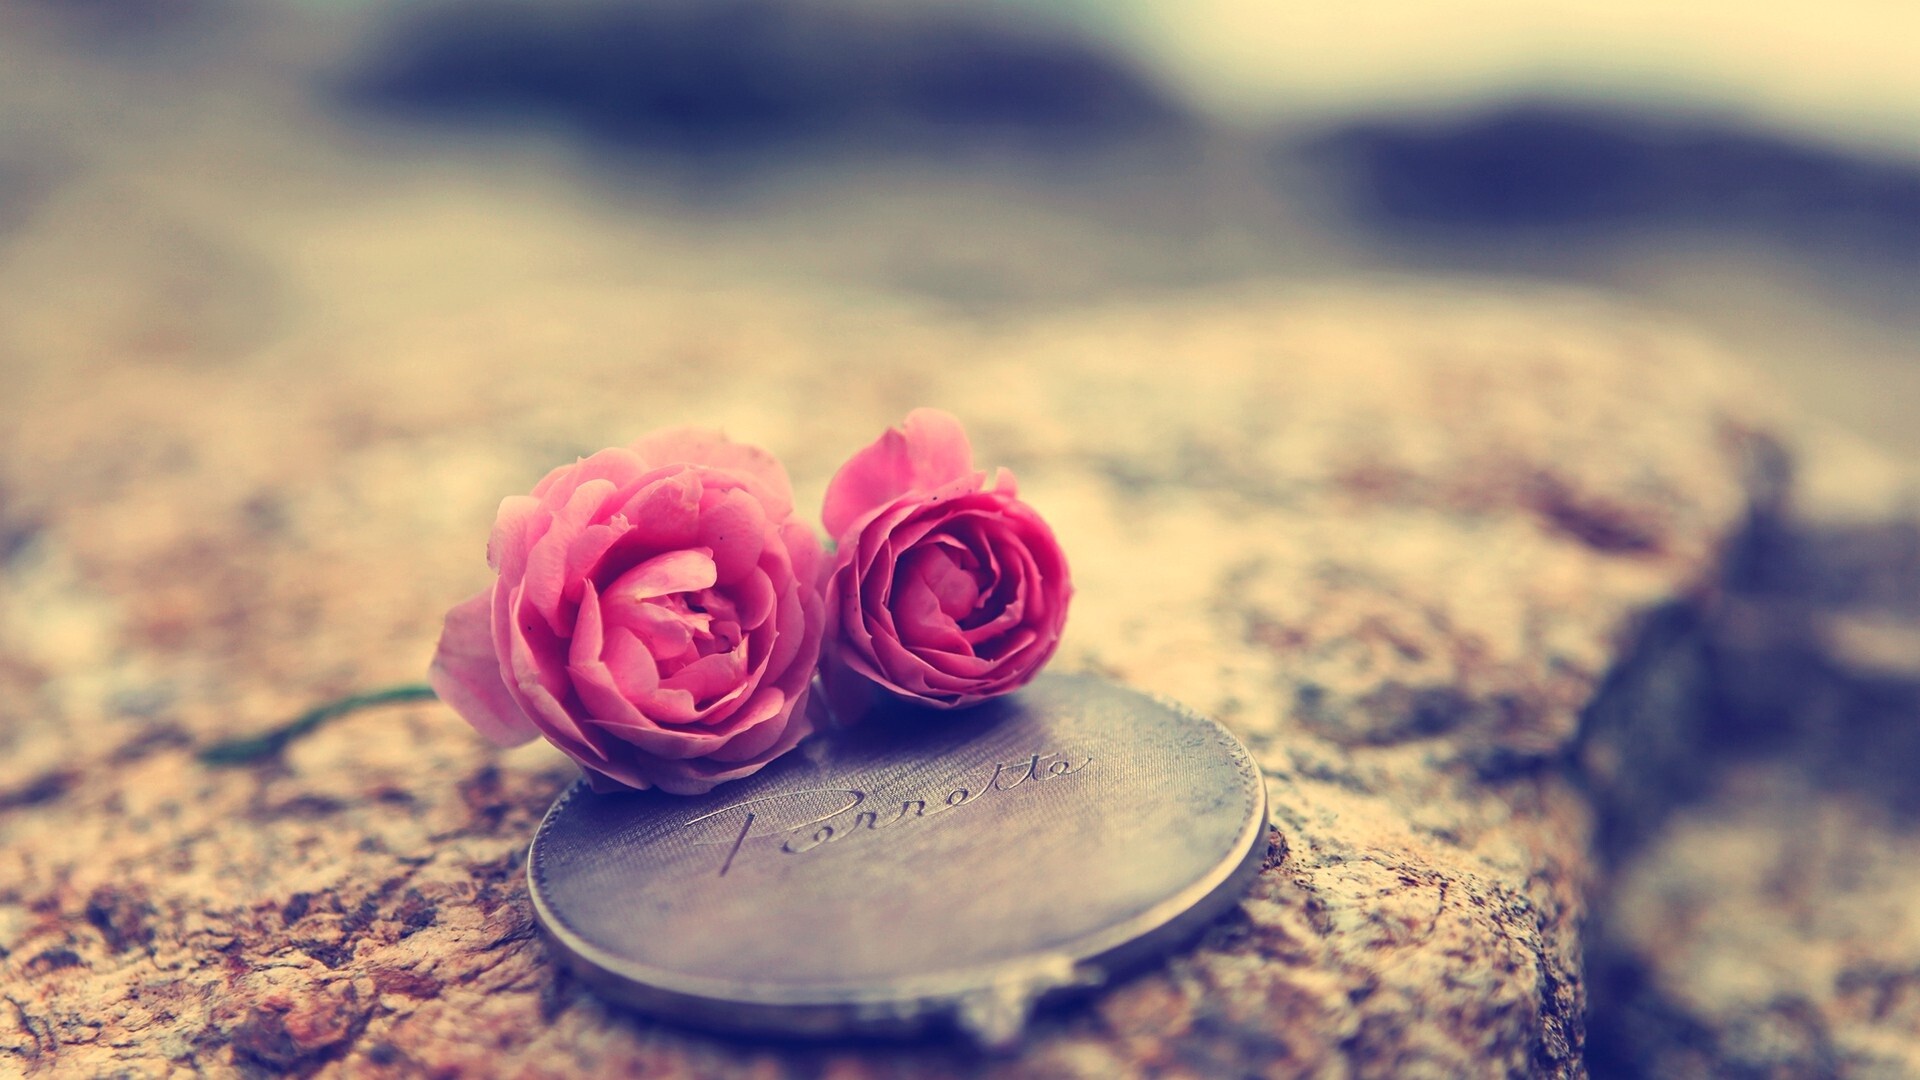 Girly: Roses, The symbol of love, Beauty and elegance, A beautiful charm. 1920x1080 Full HD Background.